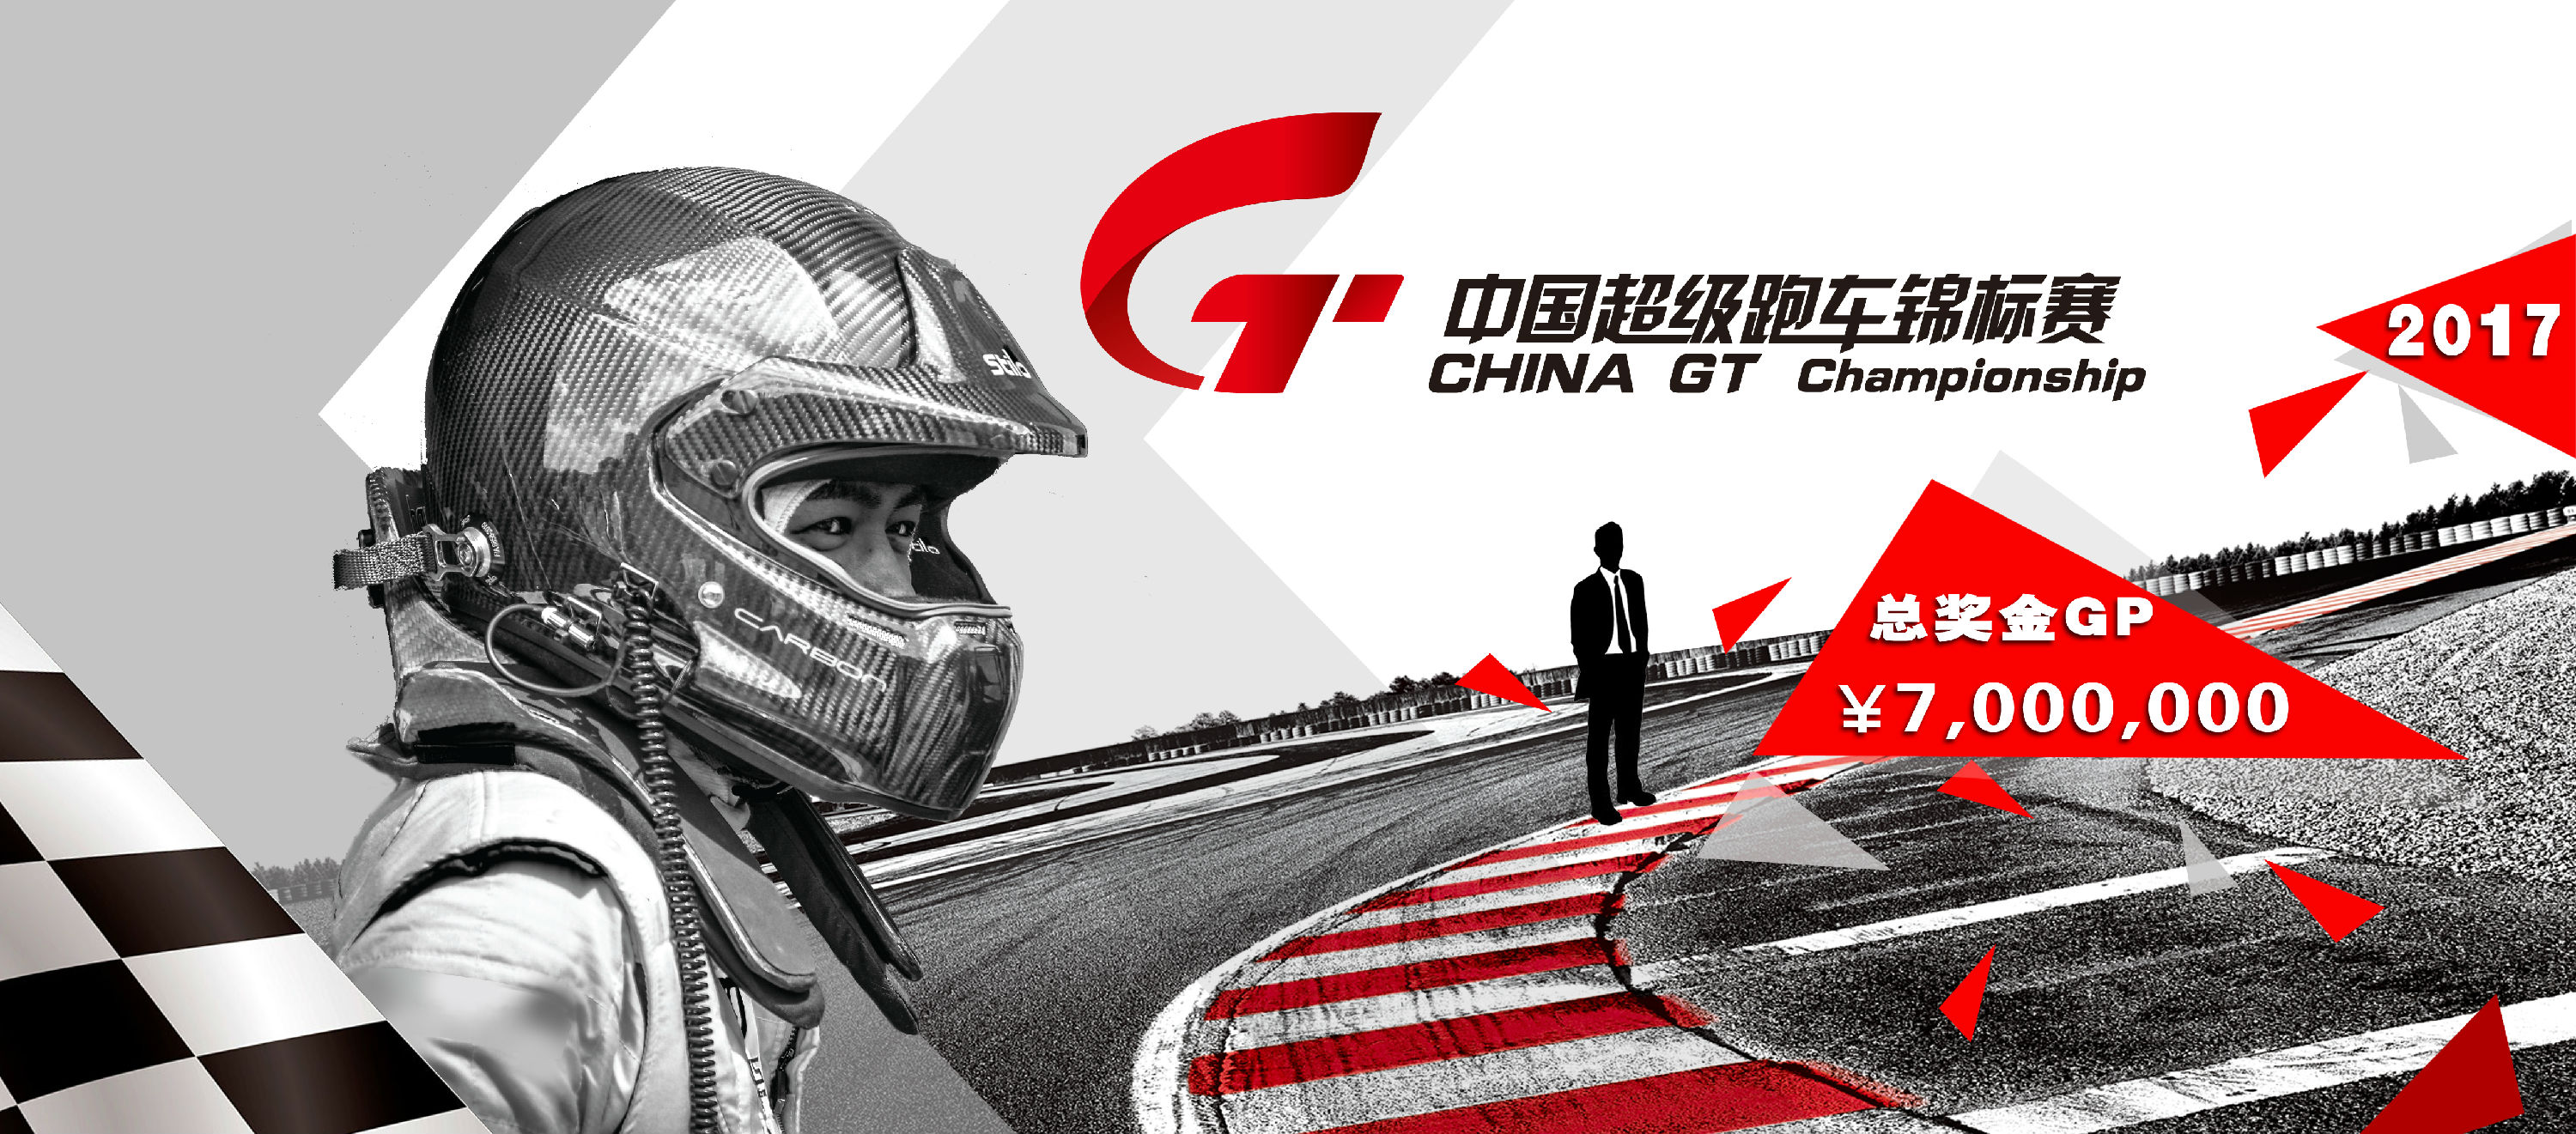 China GT Partners Conference – Reaching new heights!